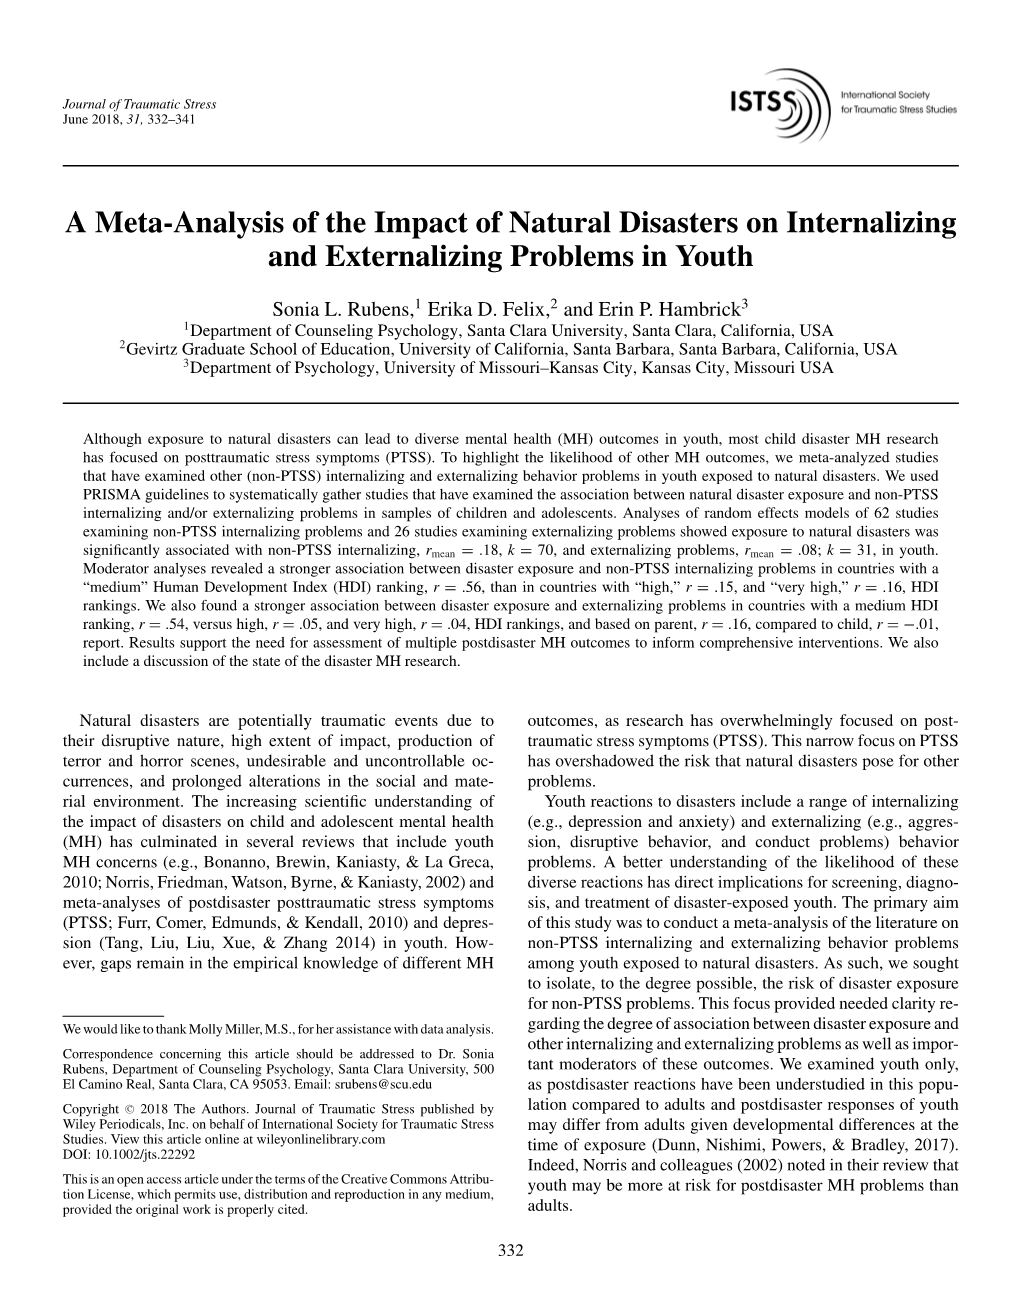 A Meta-Analysis of the Impact of Natural Disasters on Internalizing and Externalizing Problems in Youth